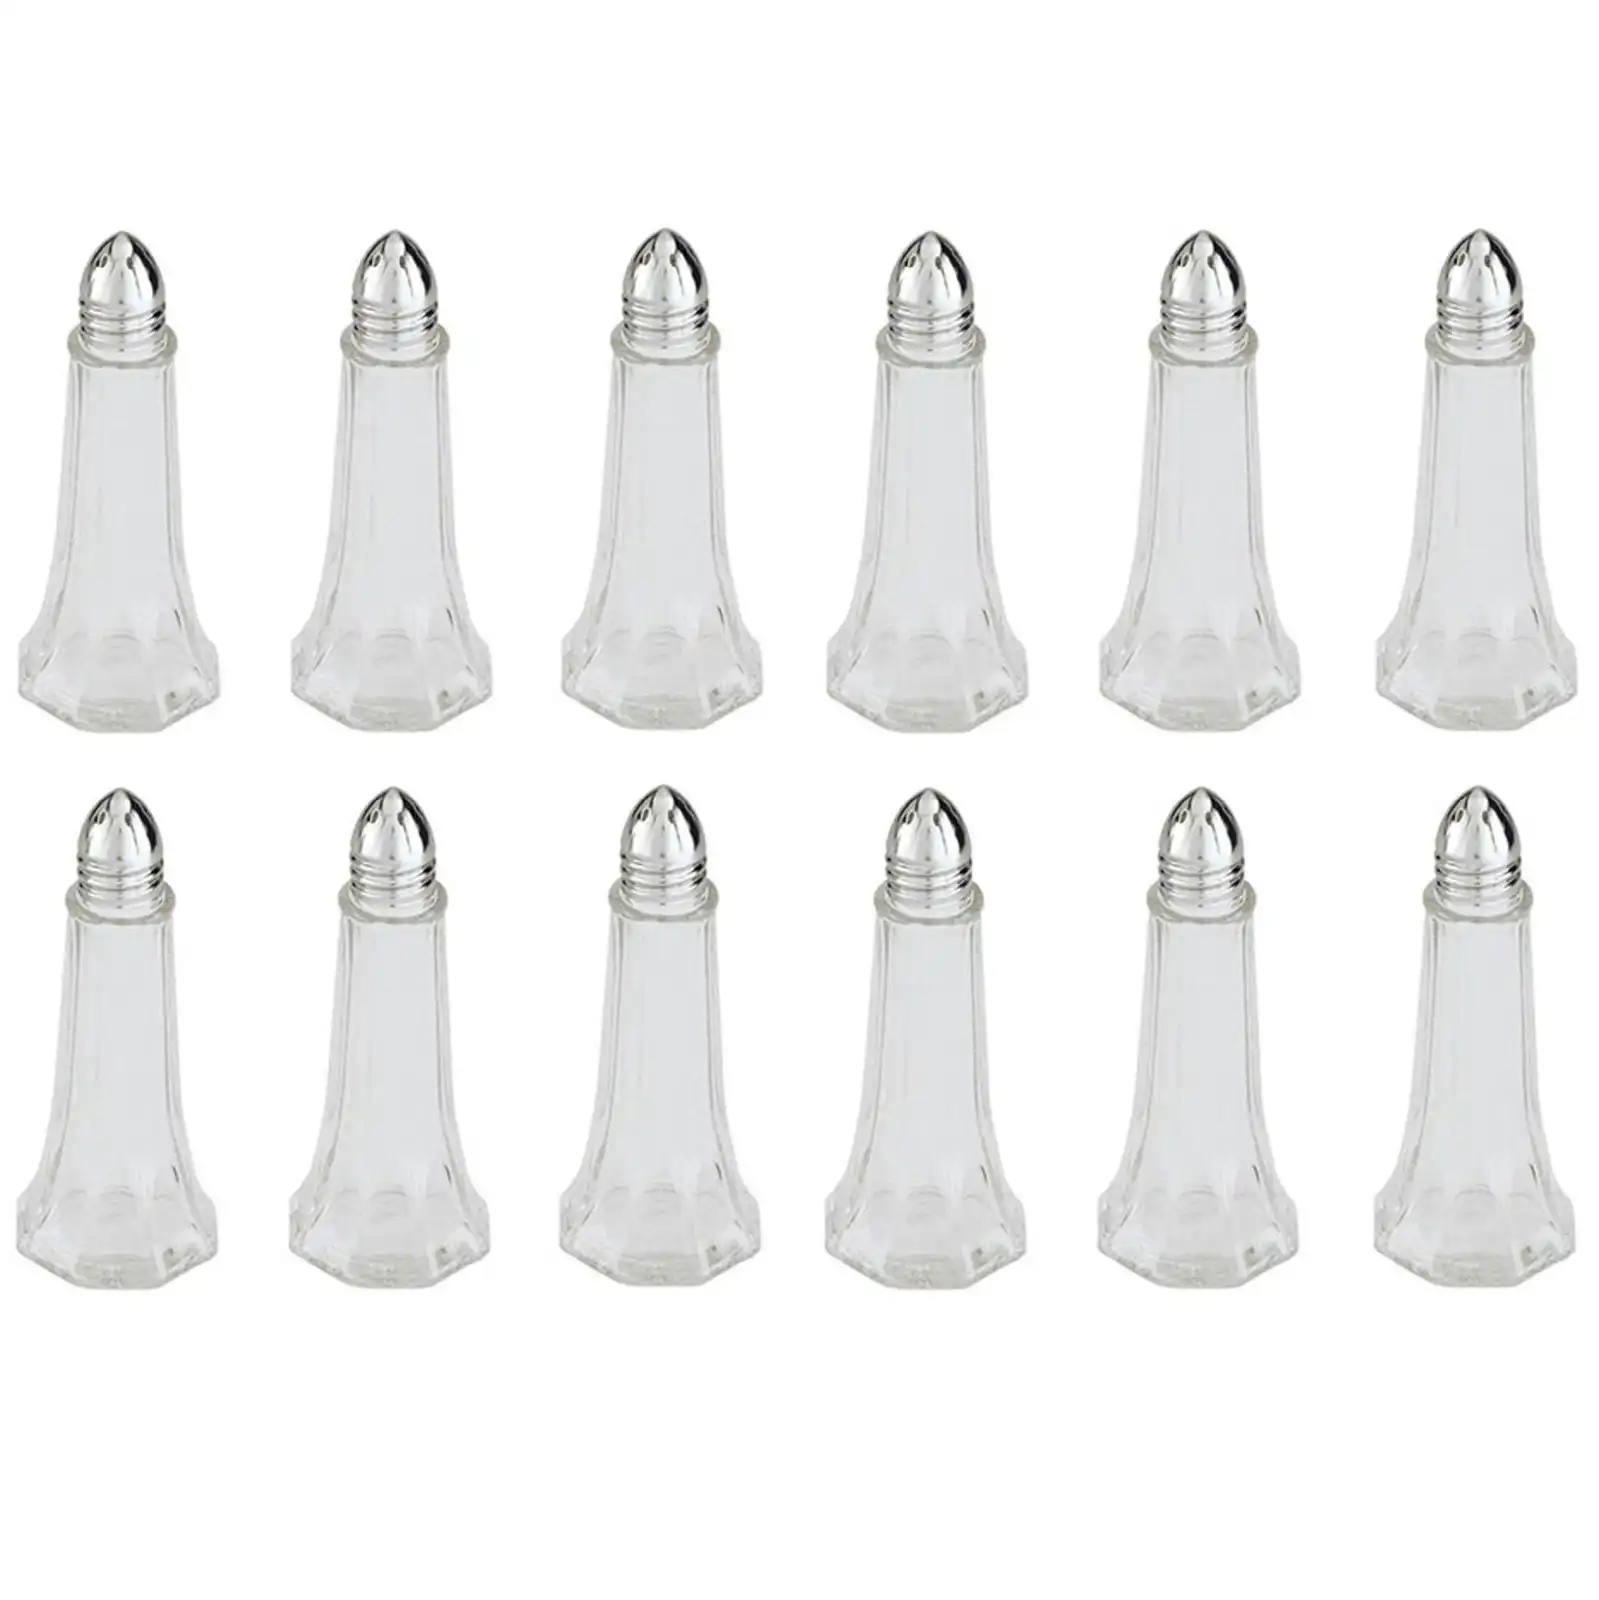 12 Glass Salt And Pepper Shakers Tower